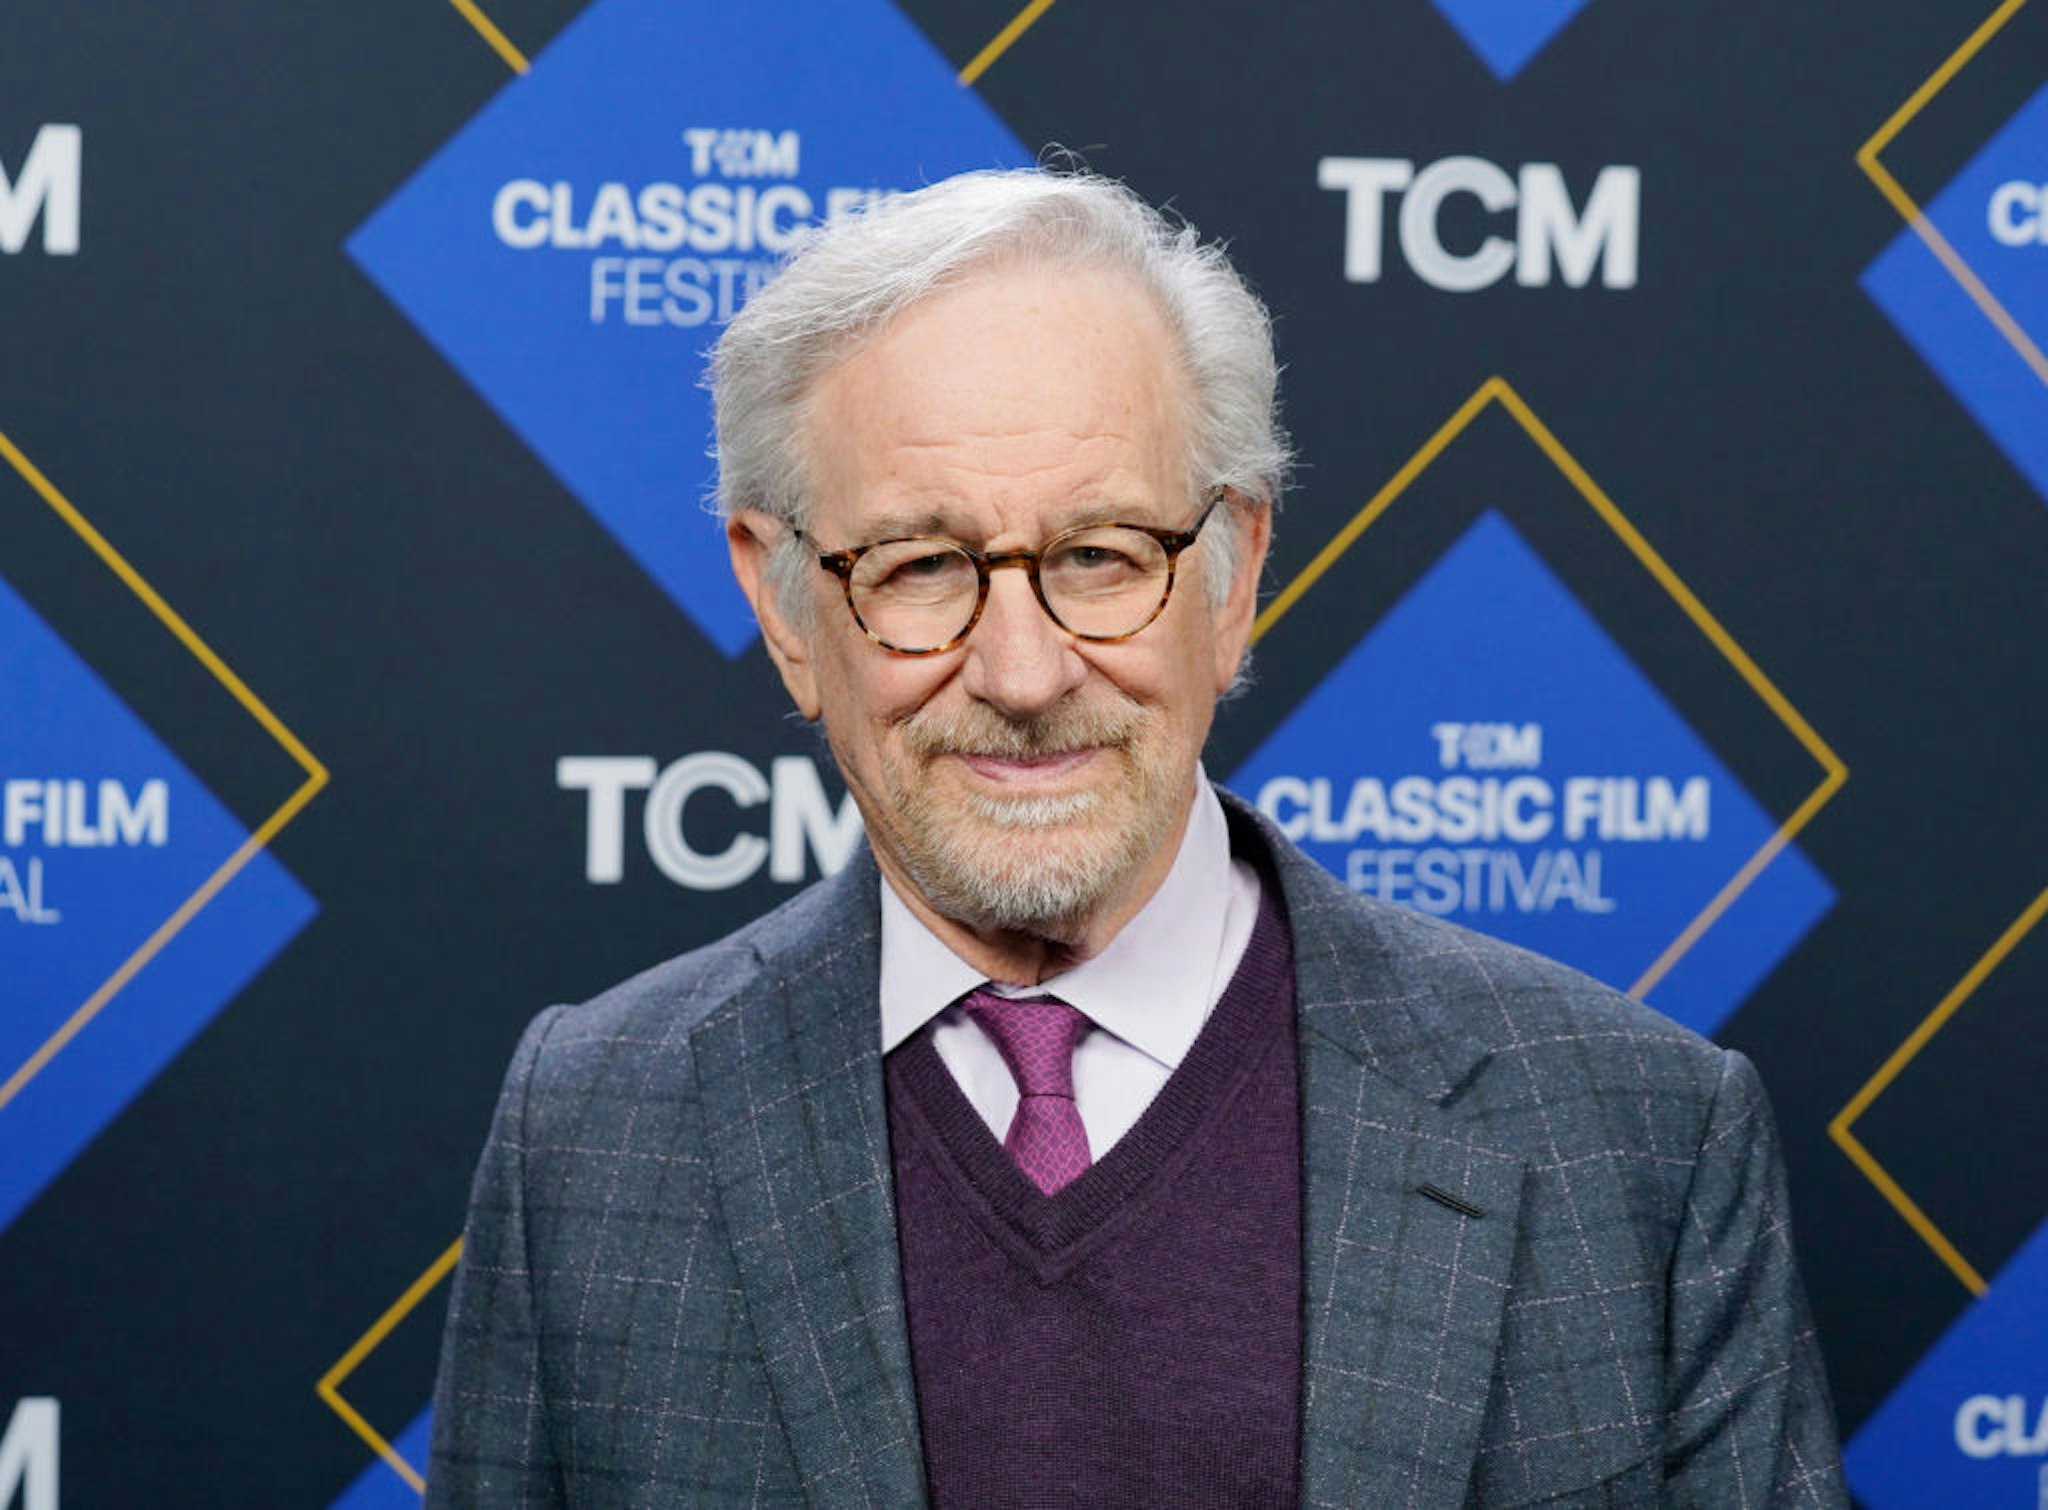 HOLLYWOOD, CALIFORNIA - APRIL 19: Steven Spielberg attends the "Close Encounters of the Third Kind" screening during the 2024 TCM Classic Film Festival at TCL Chinese Theatre on April 19, 2024 in Hollywood, California.